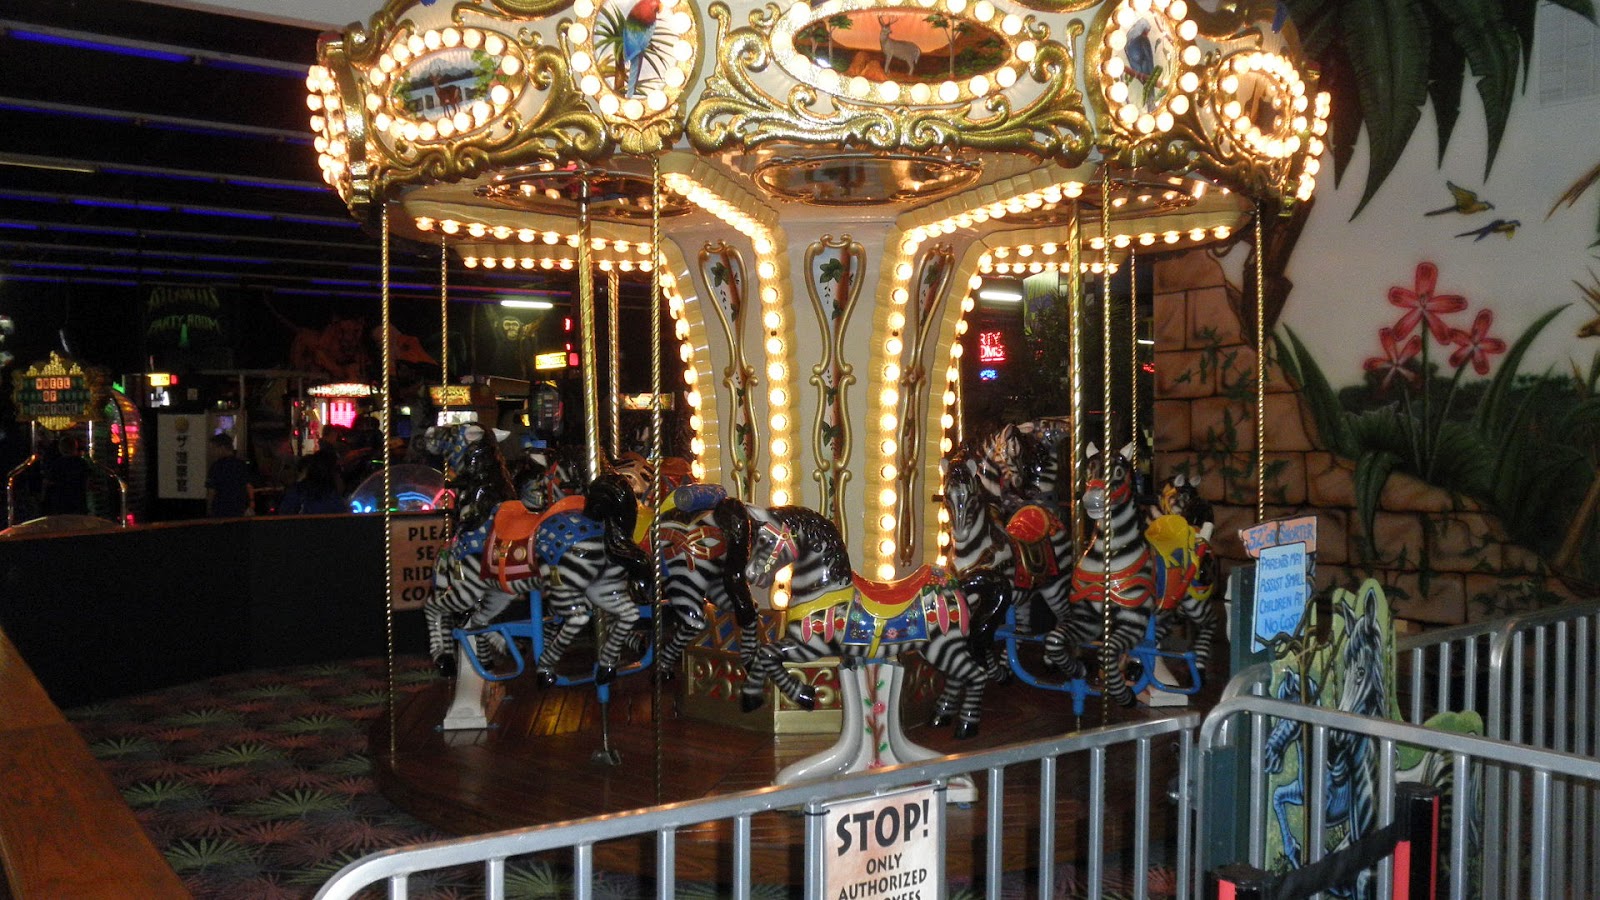 A carousel with people riding it at night.